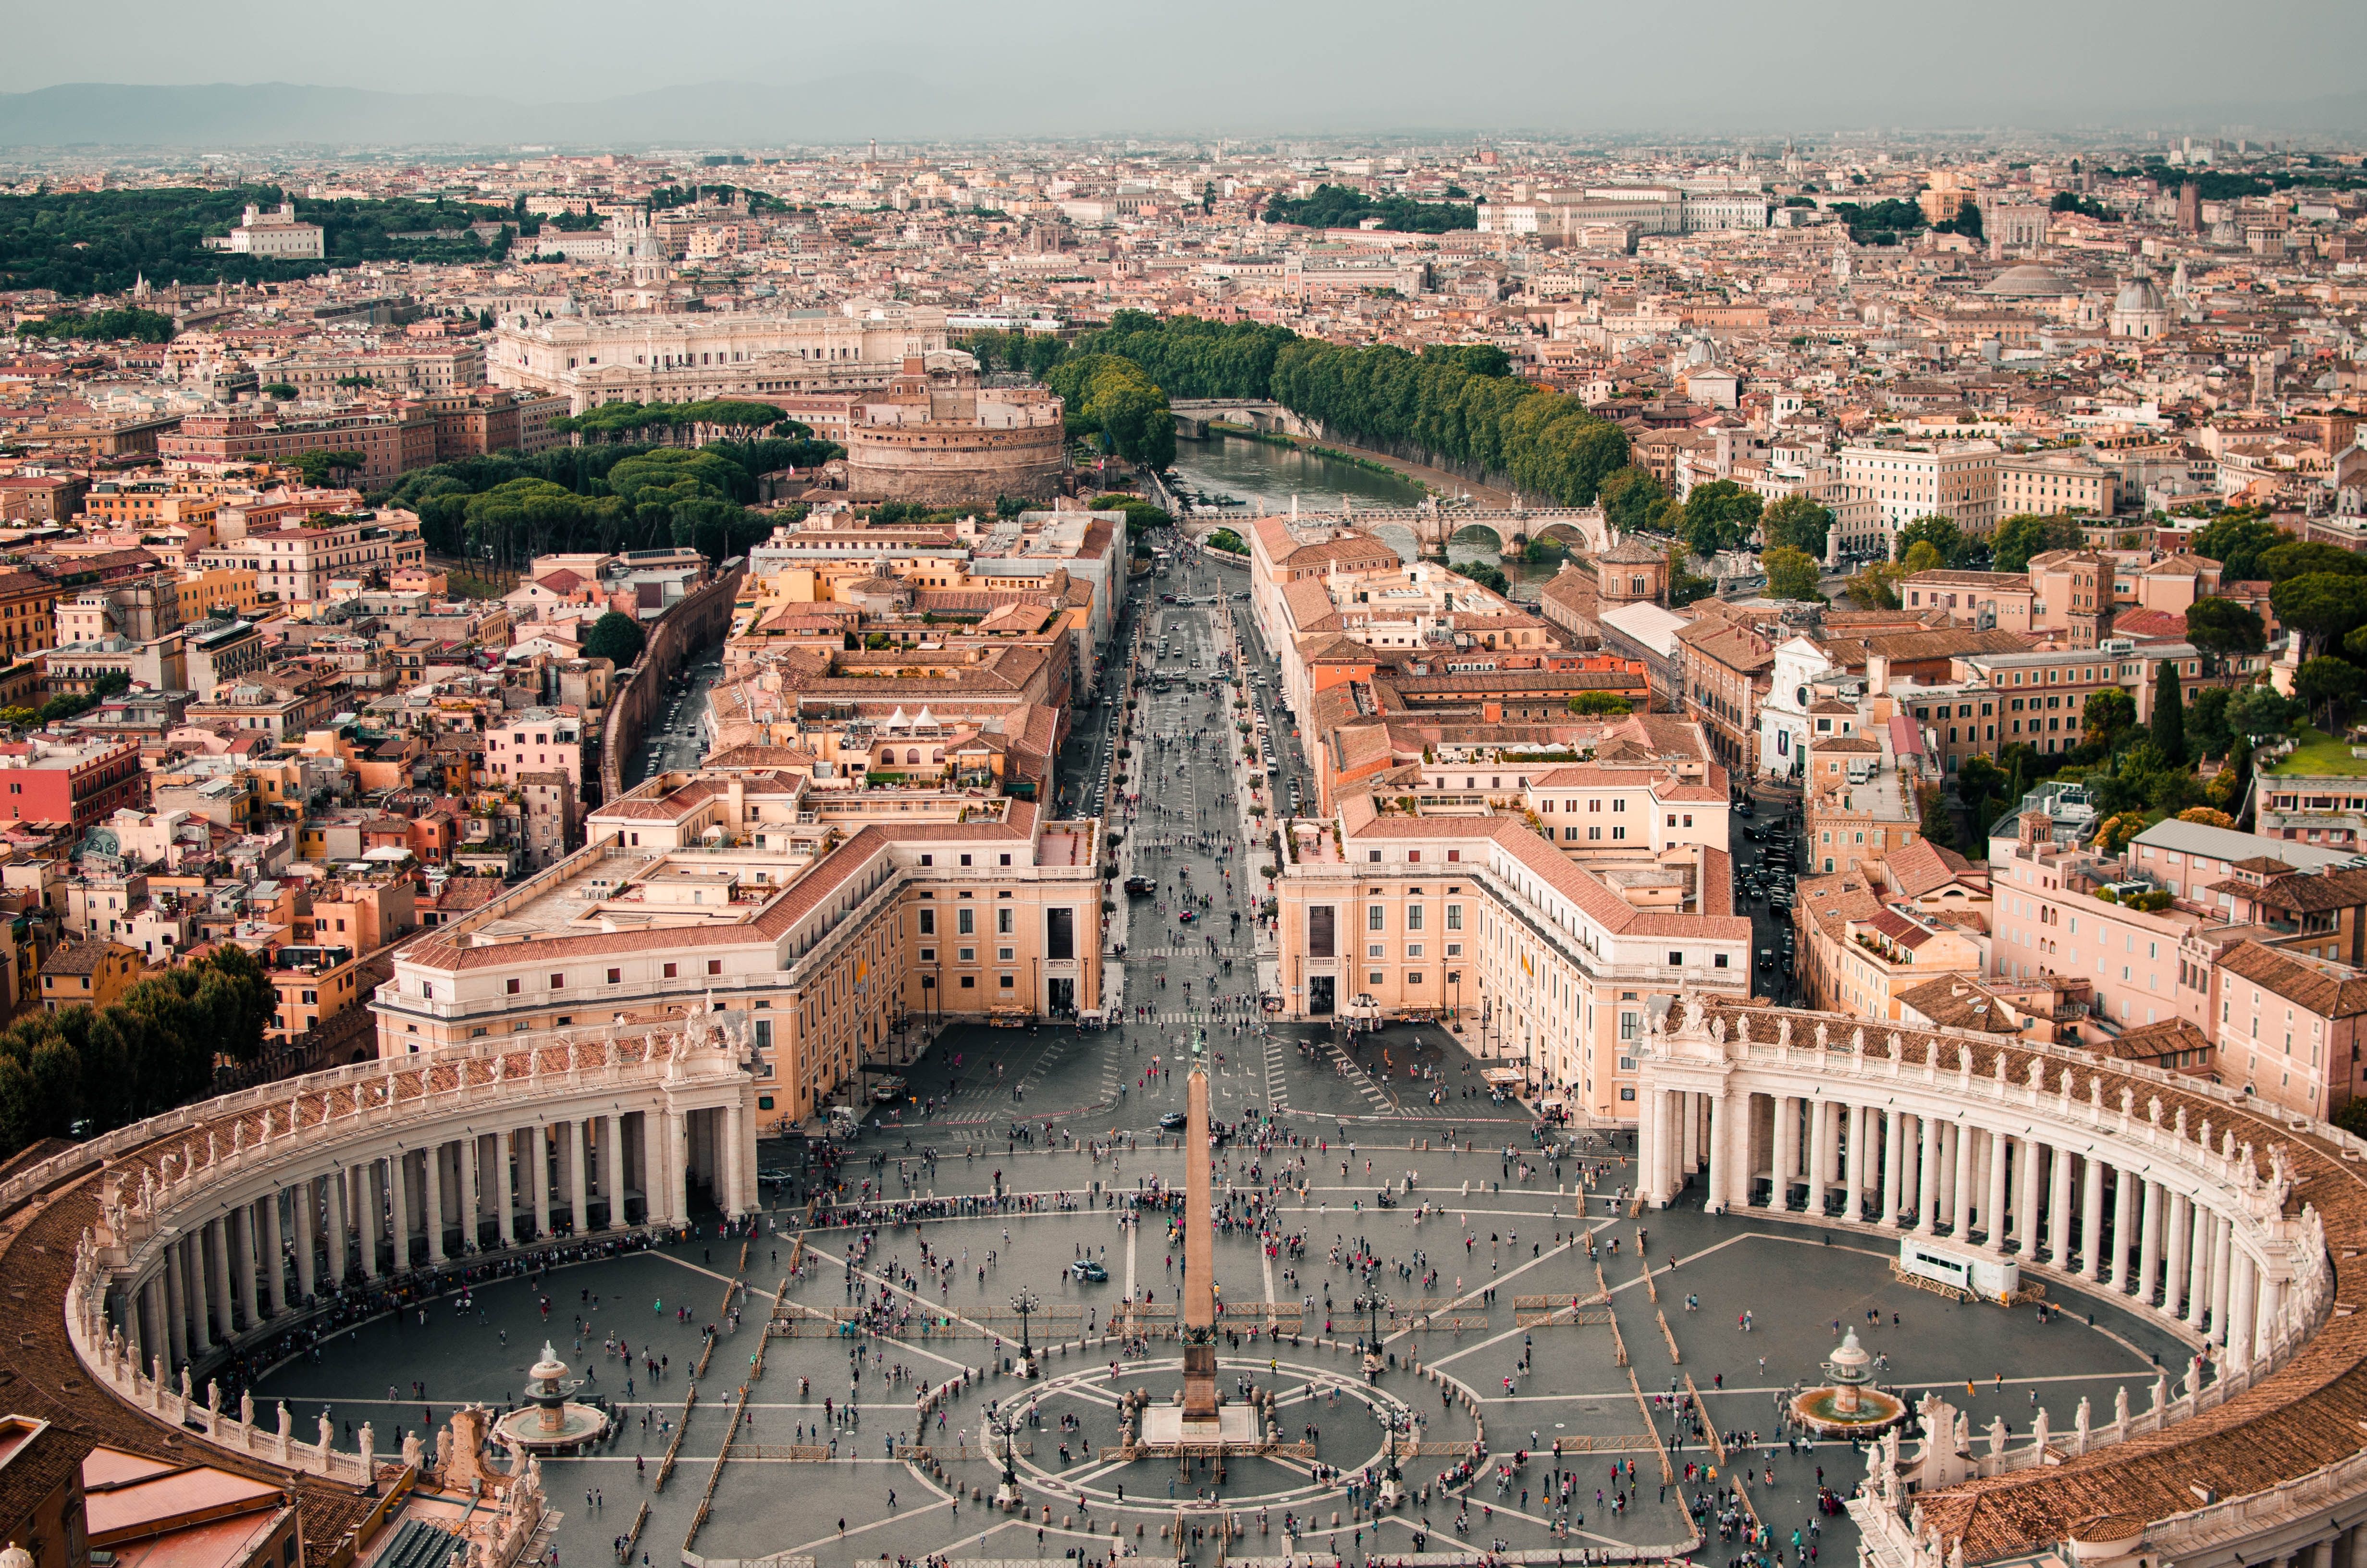 Aerial view of the Vatican City, Rome.